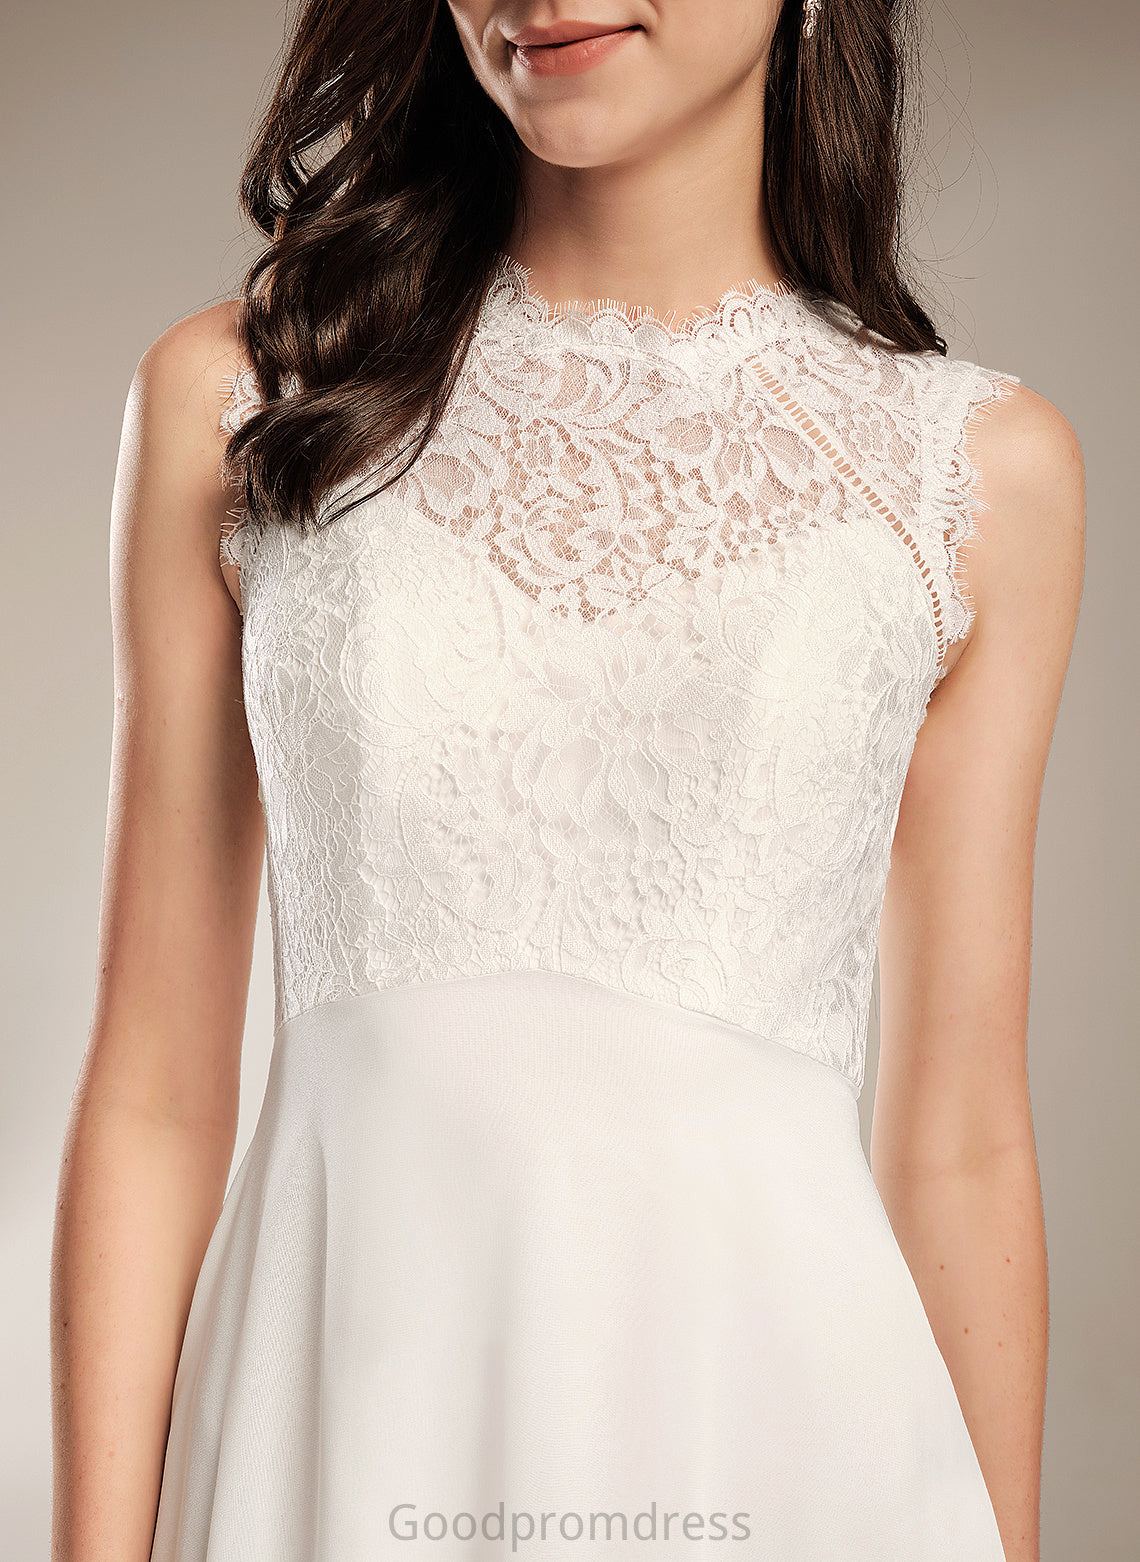 Wedding A-Line Scoop Dress With Lucille Floor-Length Neck Wedding Dresses Lace